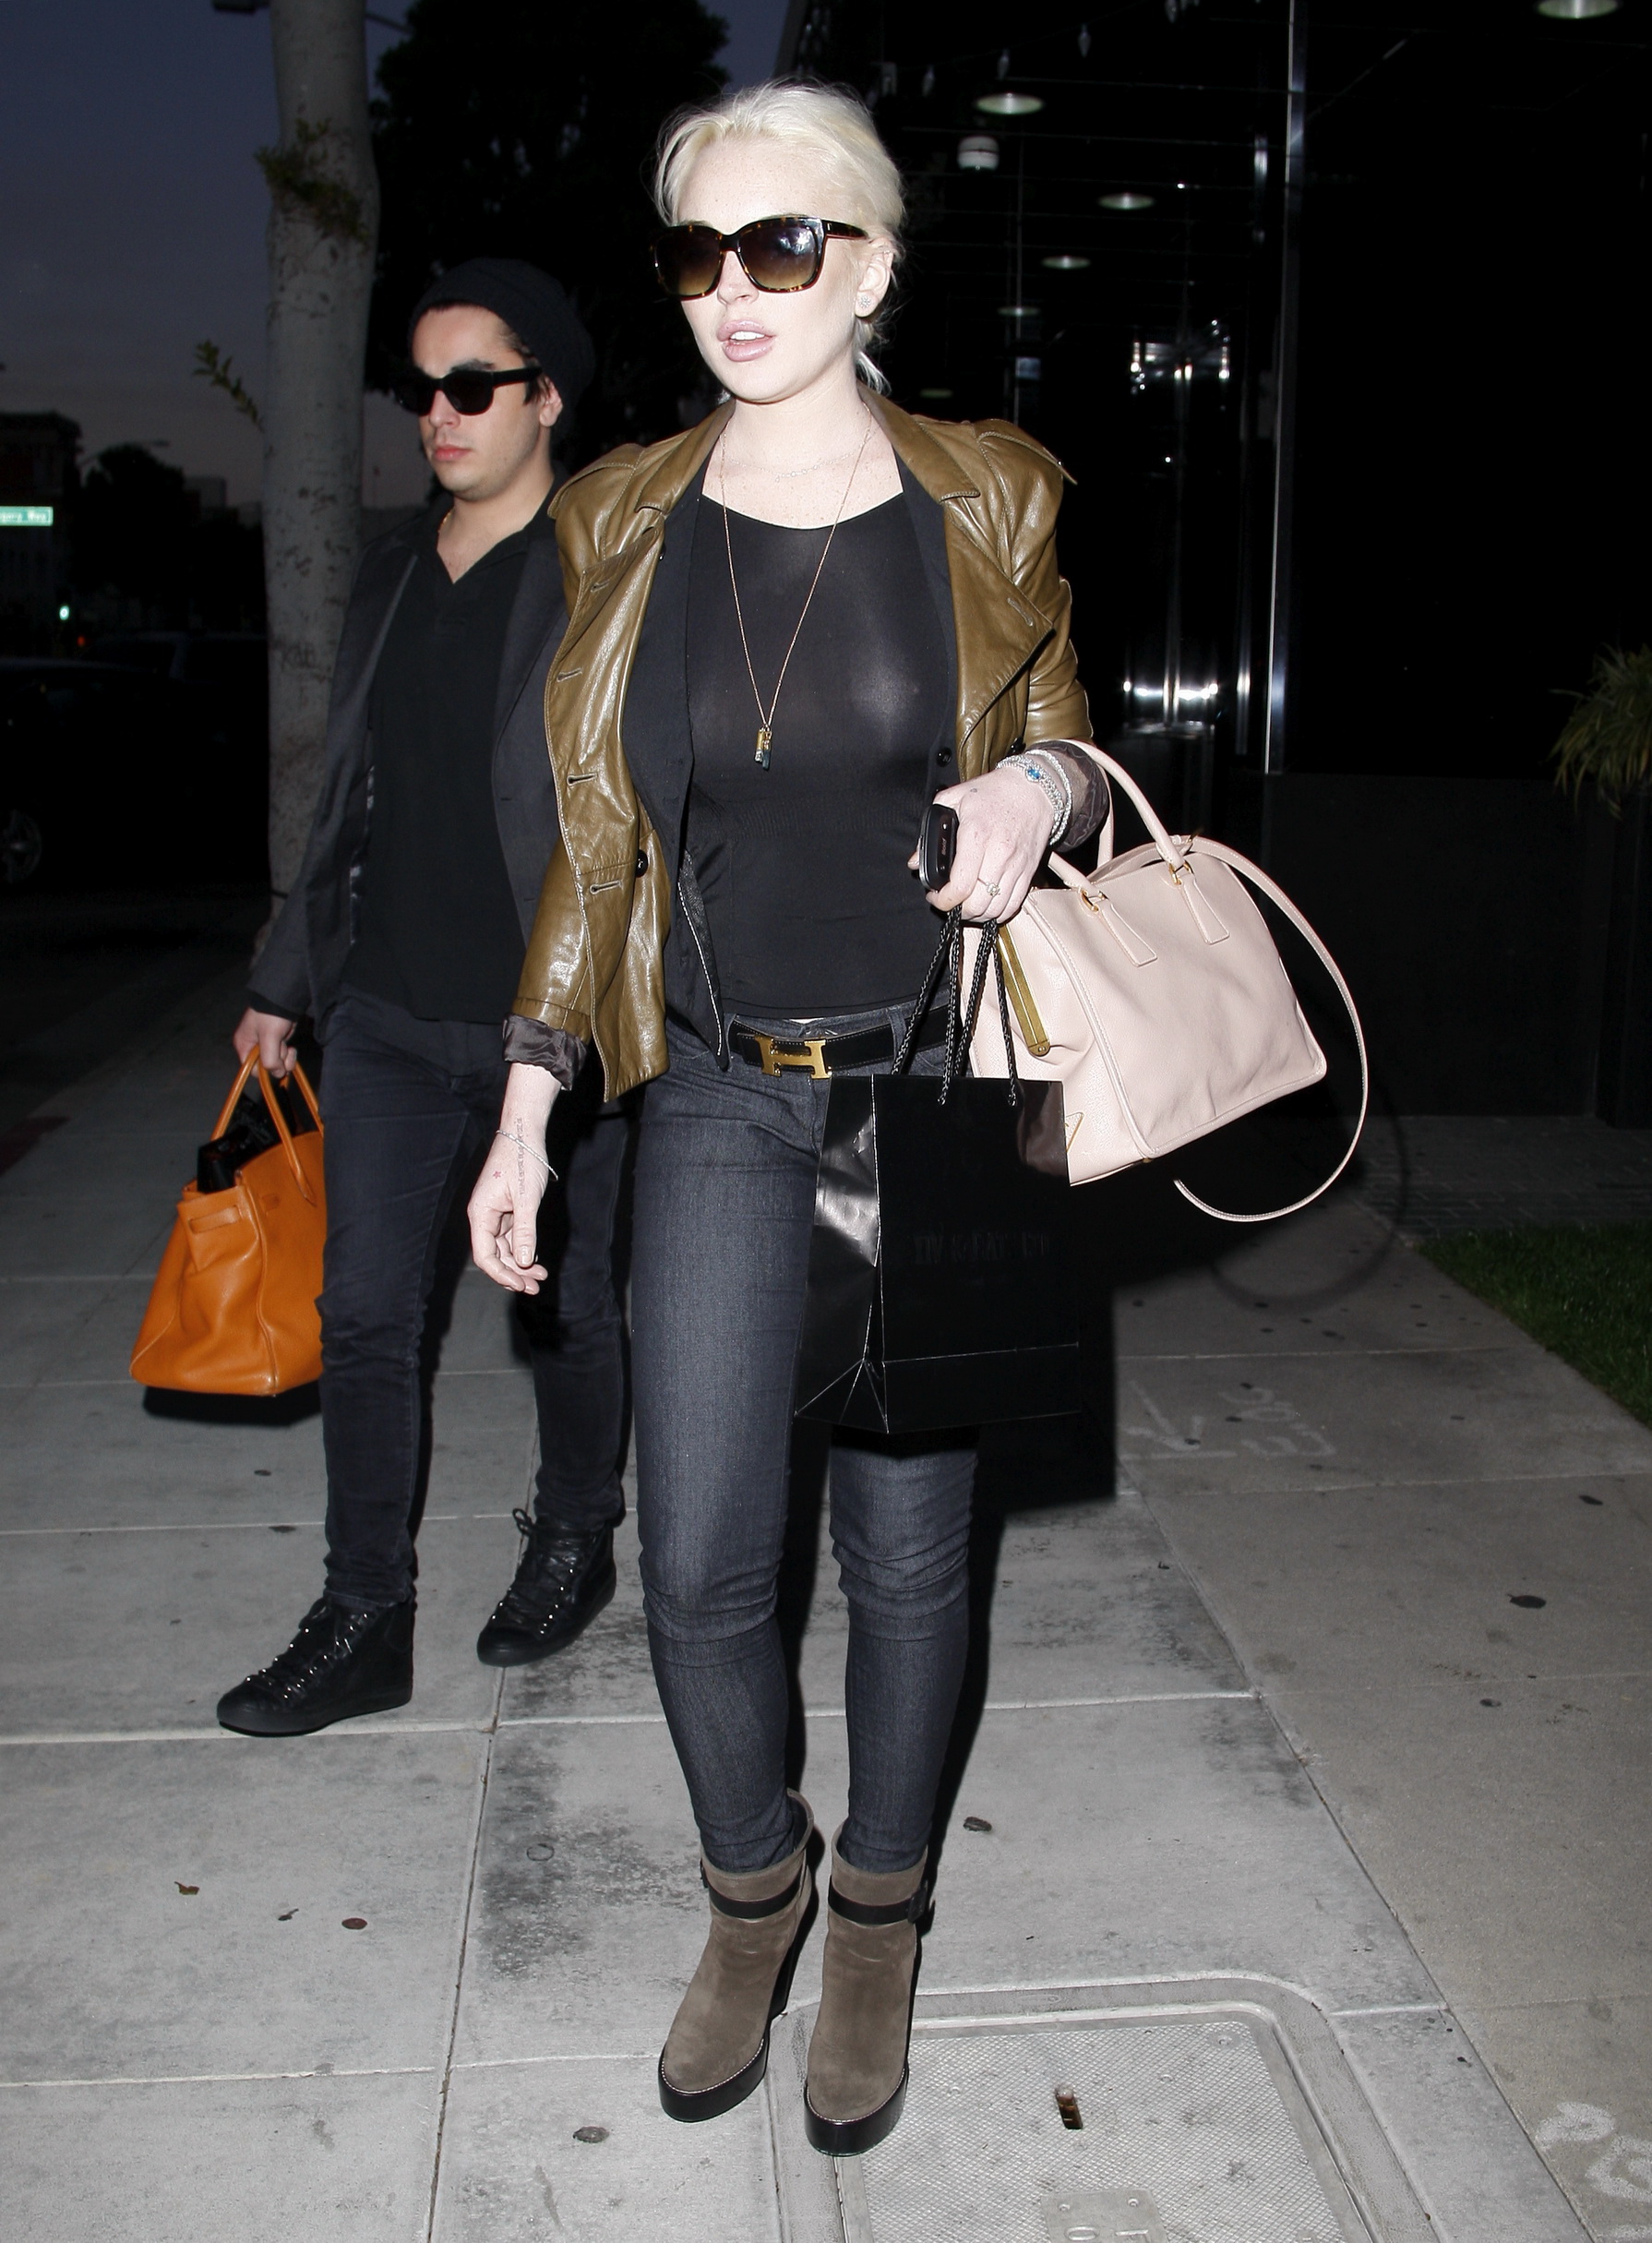 Lindsay Lohan out shopping in LA.